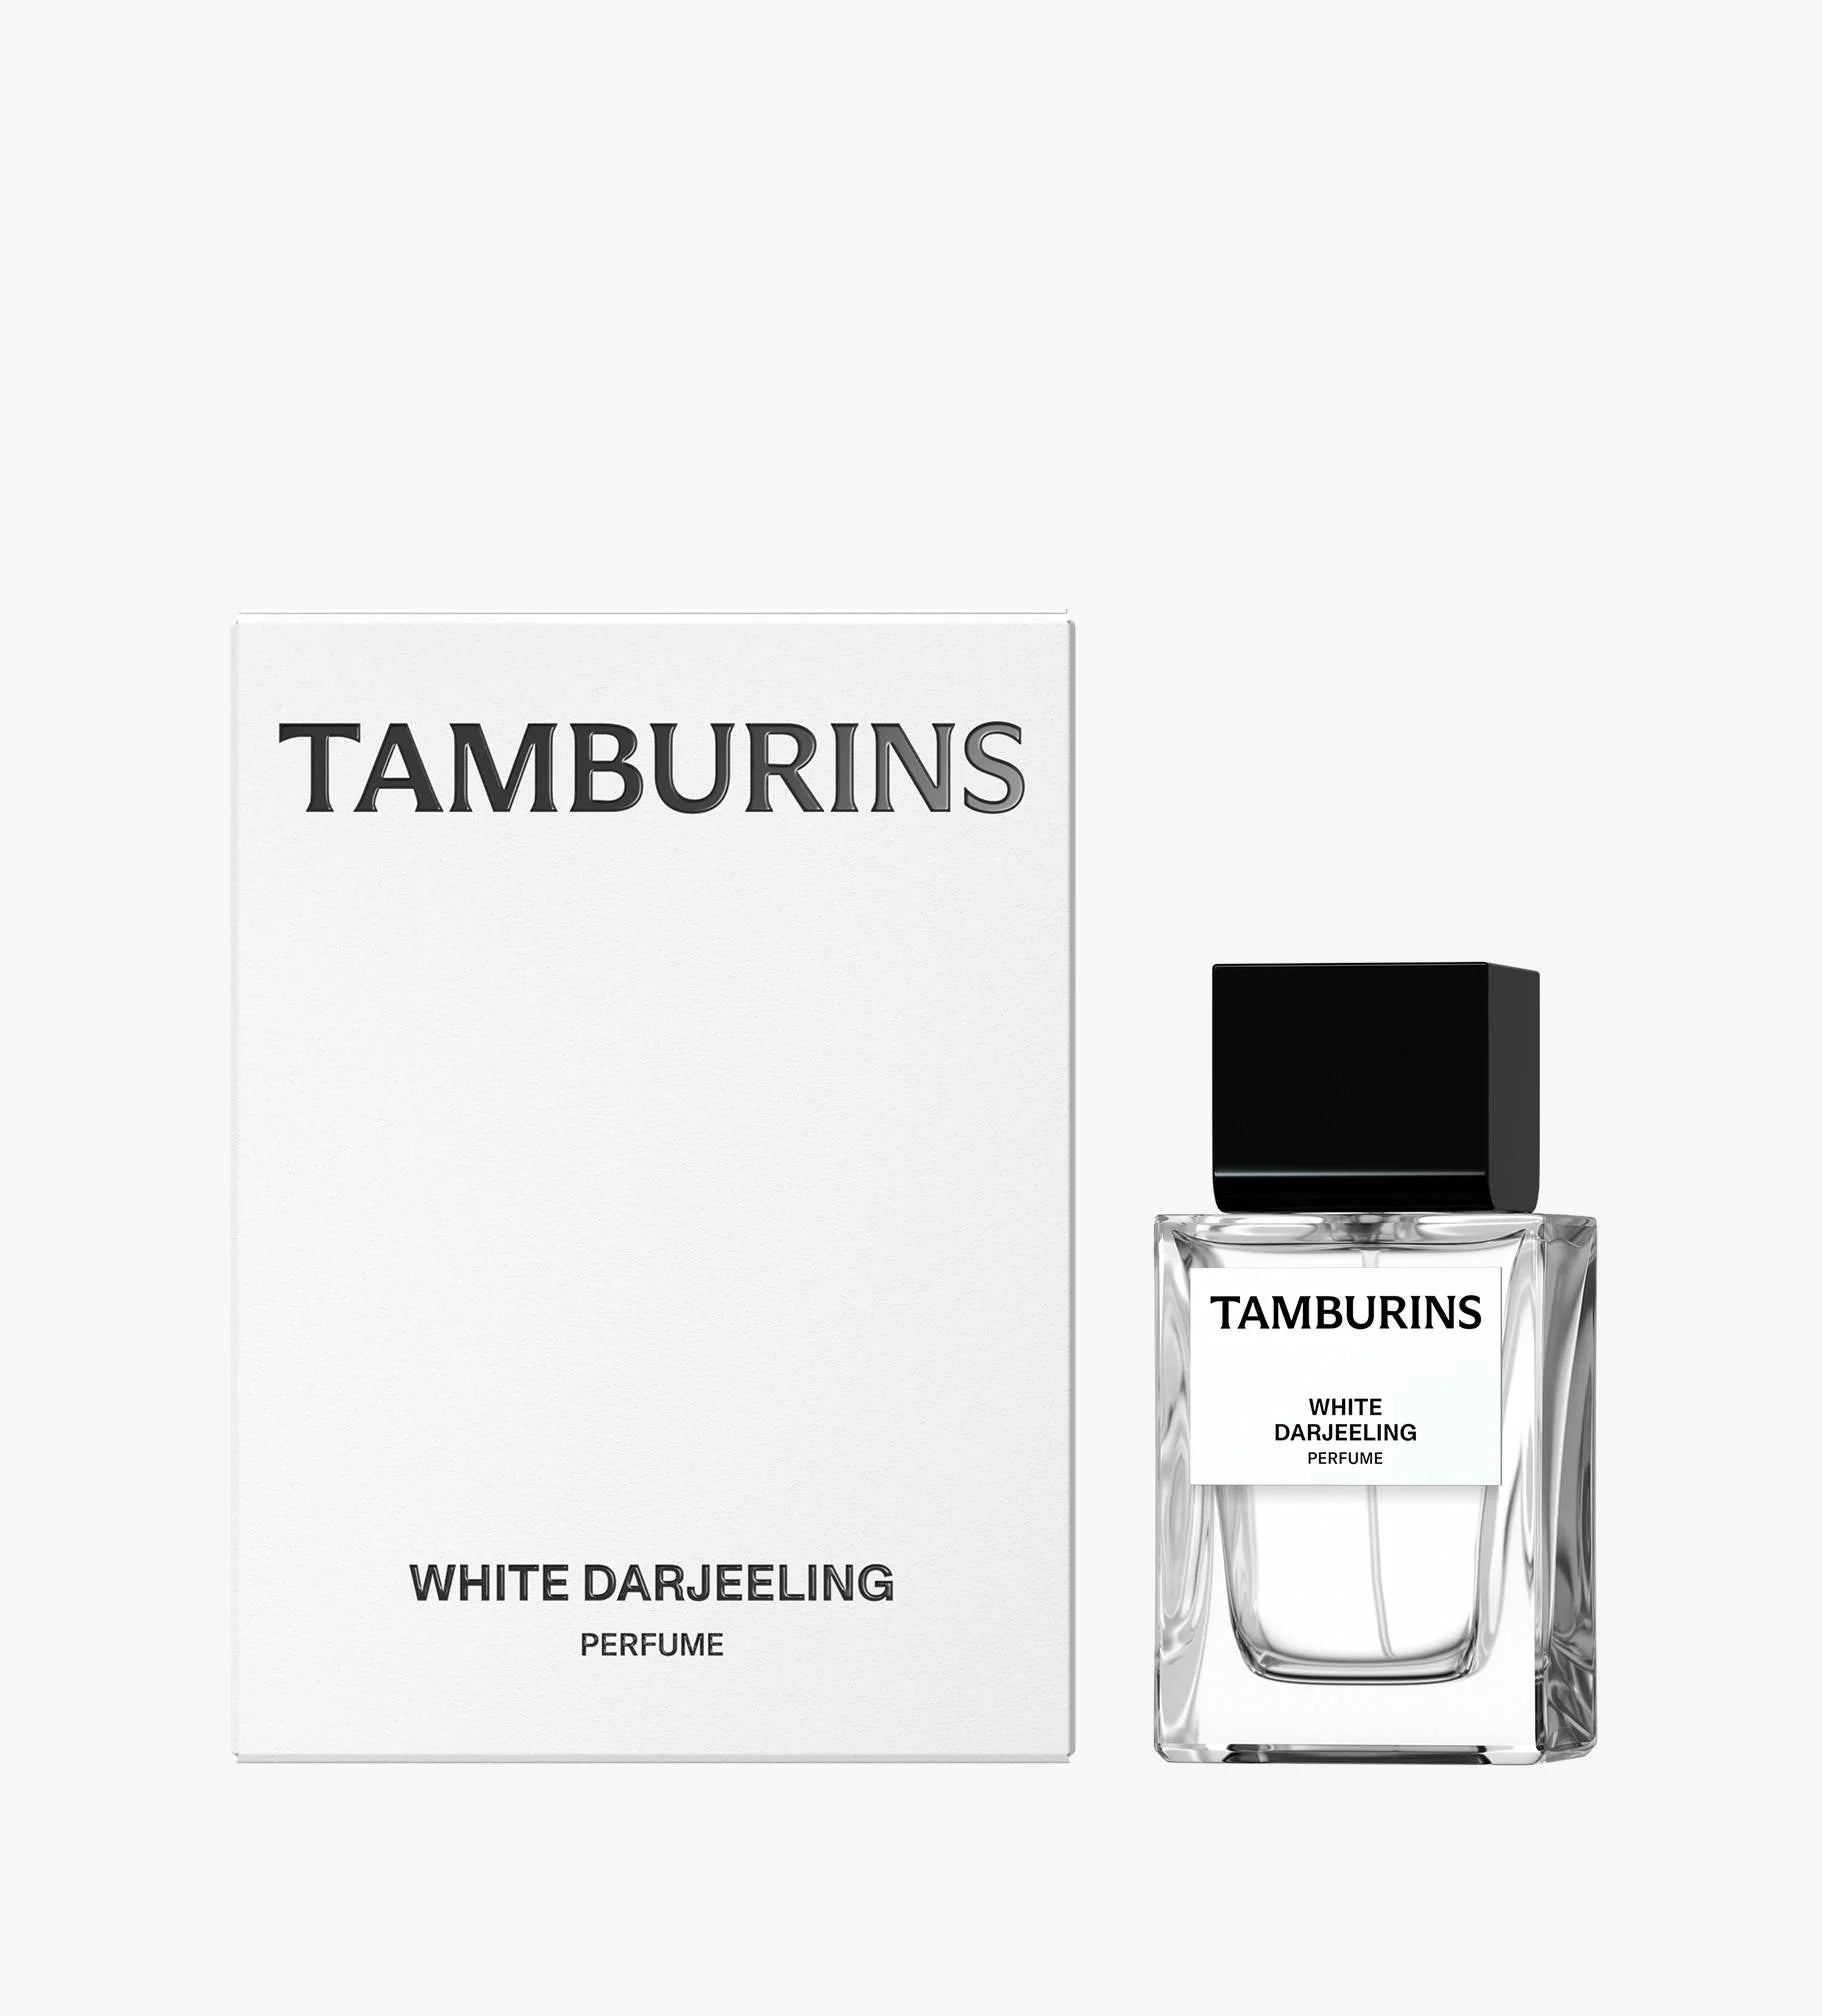 11ml or 50ml TAMBURINS Perfume bottle in white, infused with Darjeeling scent.